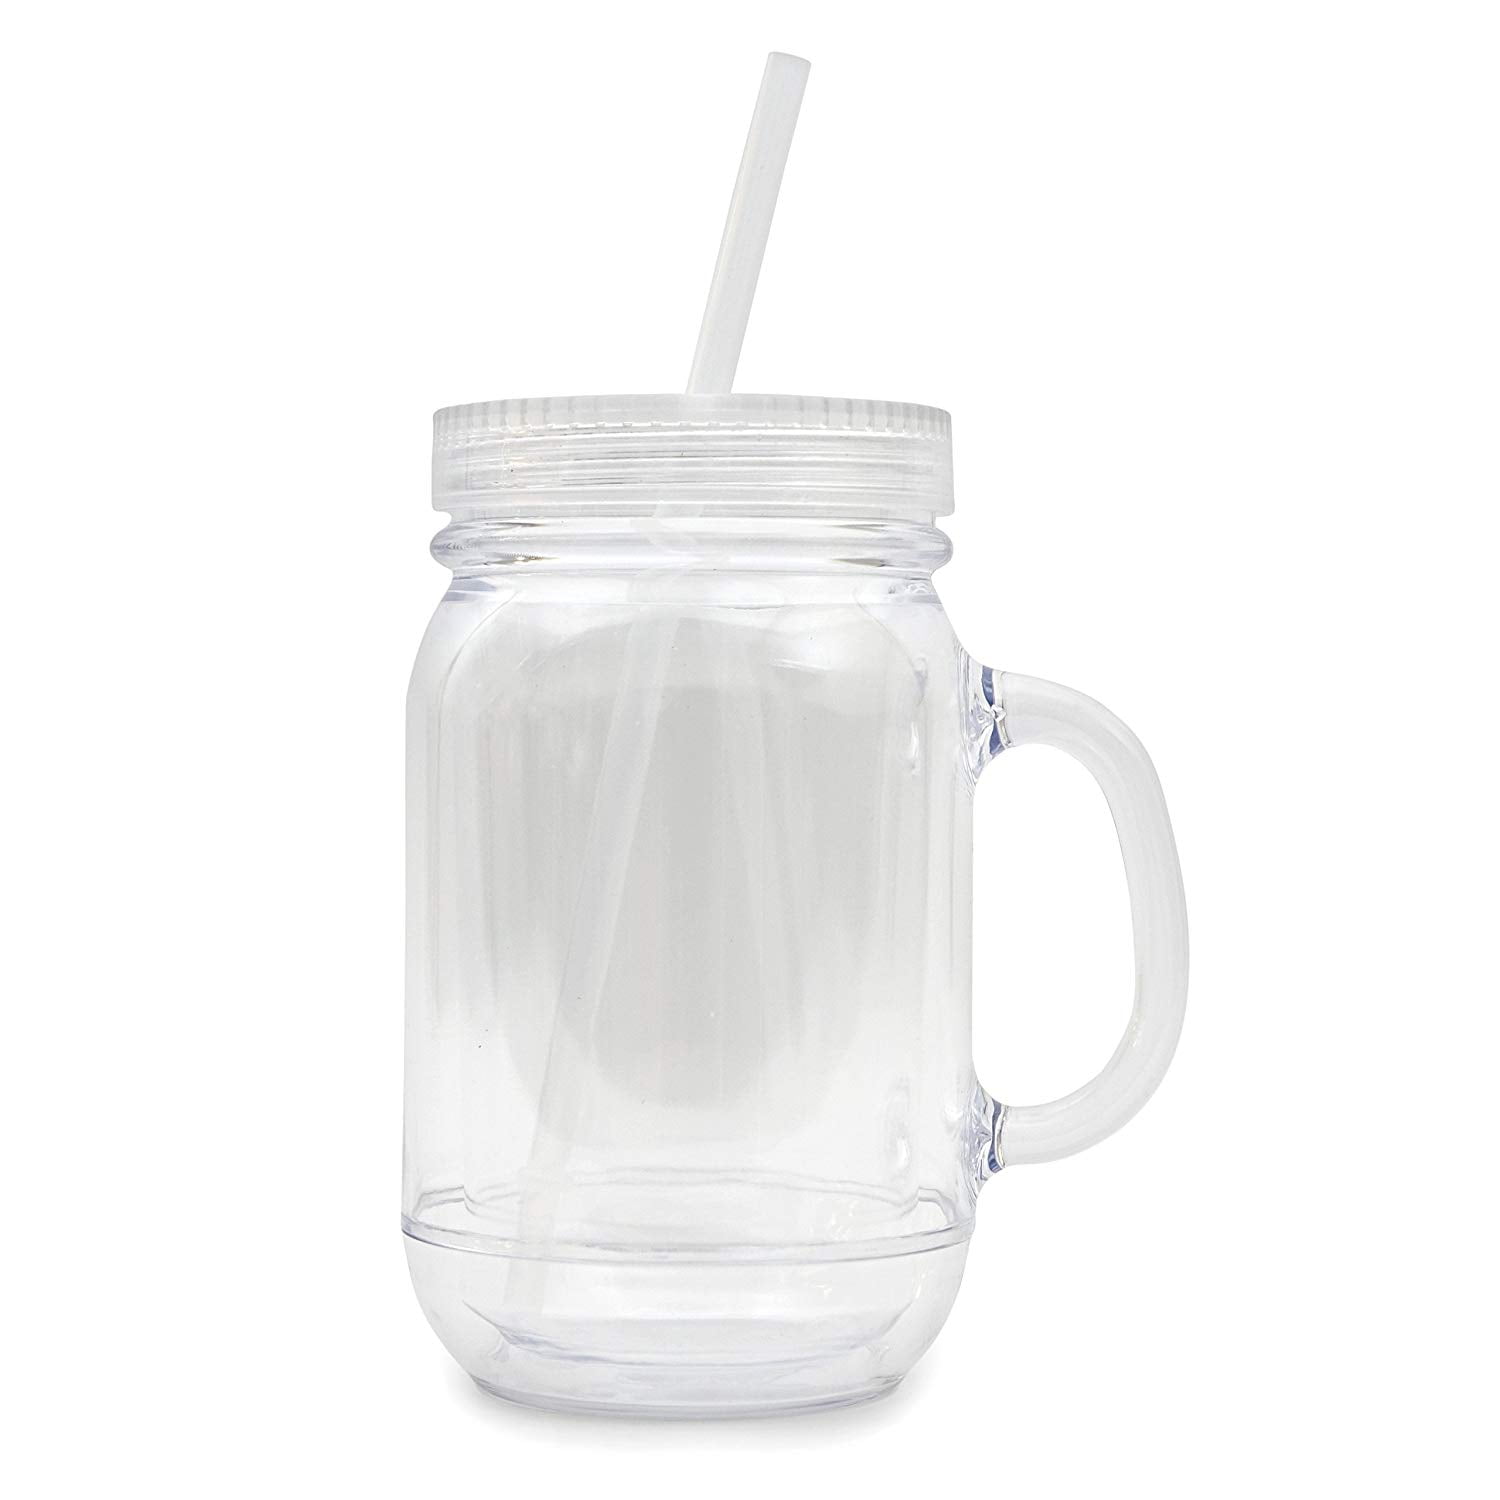 Evergreen It Takes a Big Heart Double-Walled Acrylic Mason Jar Beverage  Holder- 3.5 x 5 x 6.25 Inches